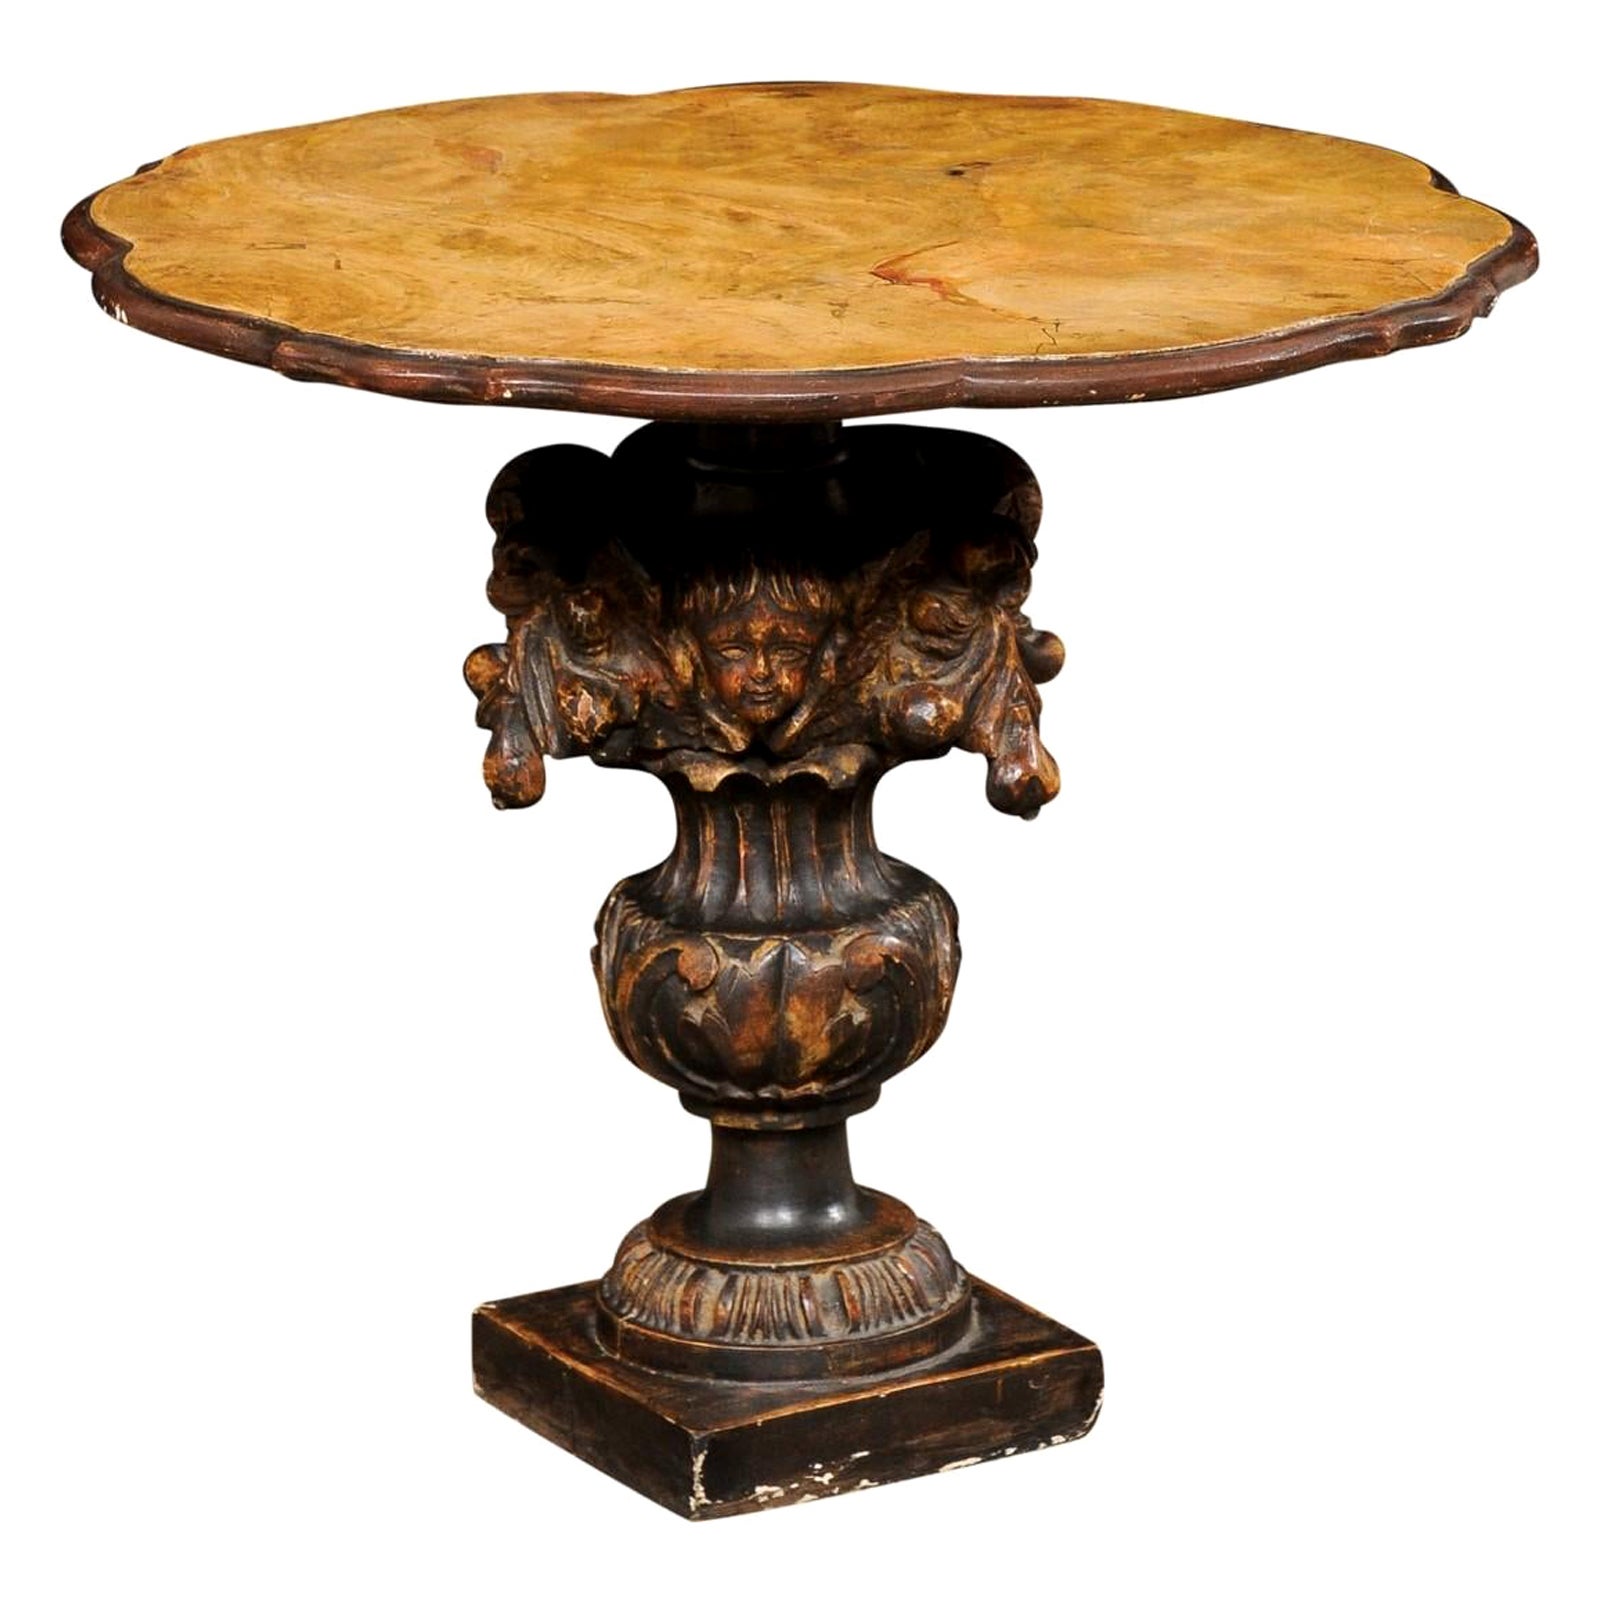 Italian Occasional Table with Putto & Urn Carved Pedestal , 19th C